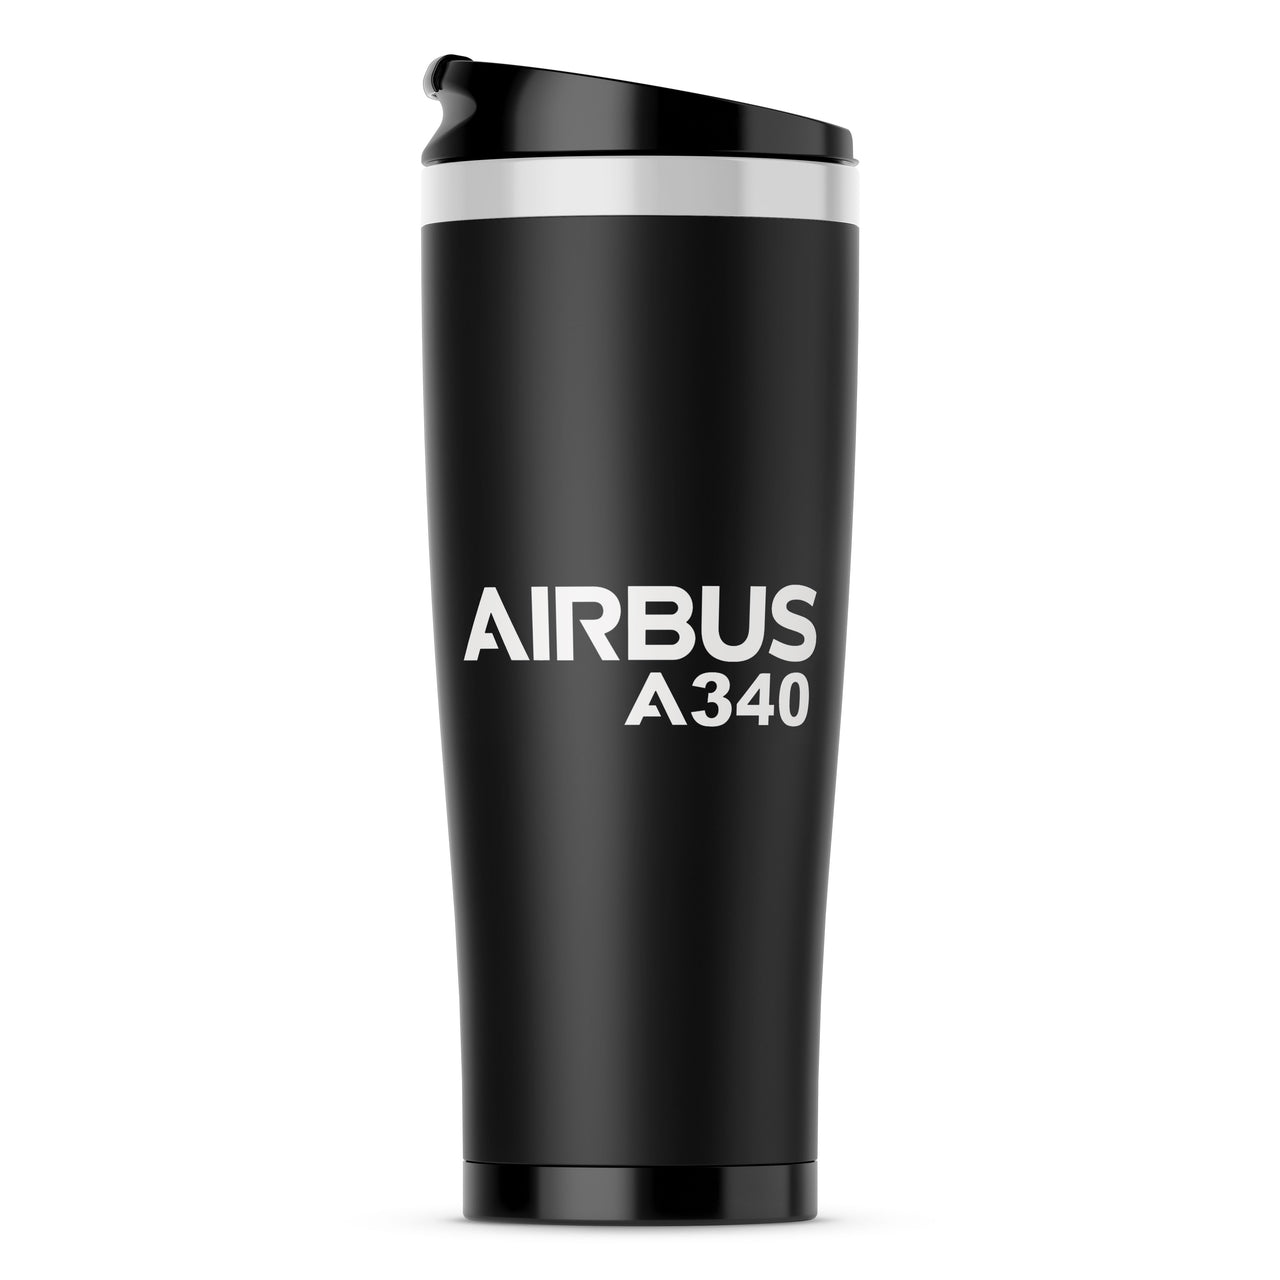 Airbus A340 & Text Designed Travel Mugs